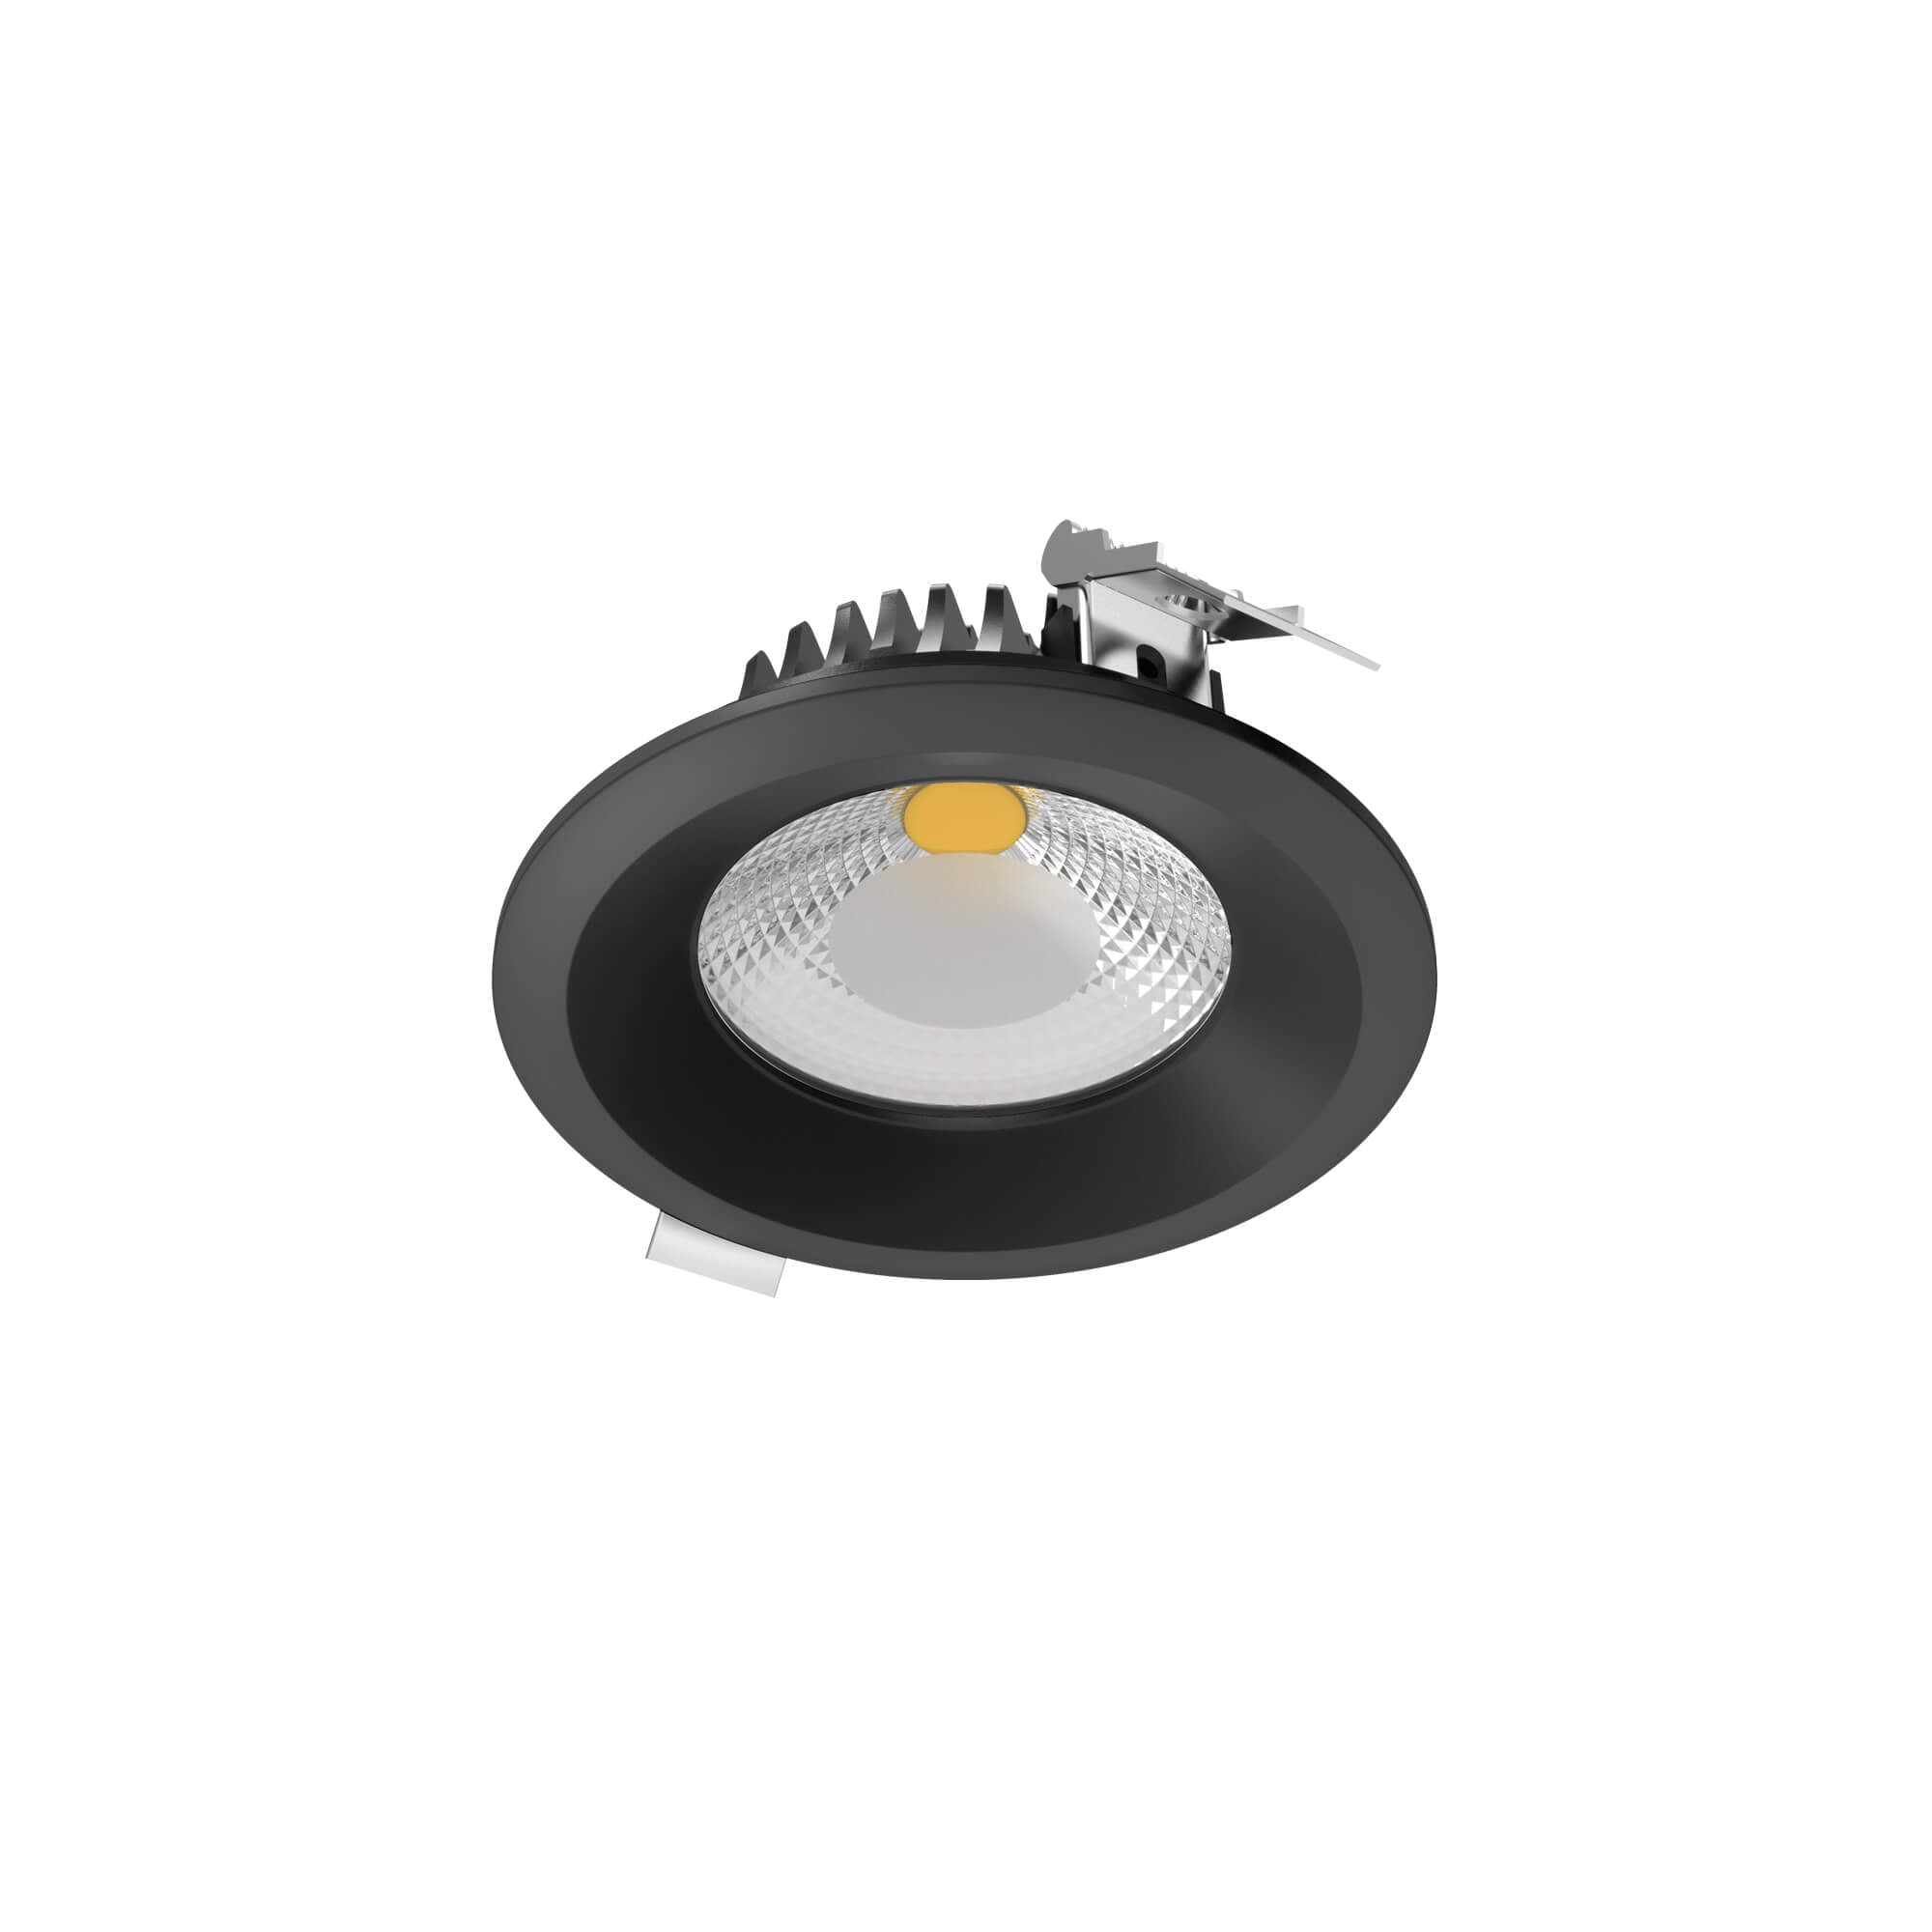 4" High Powered LED Commercial Down Light